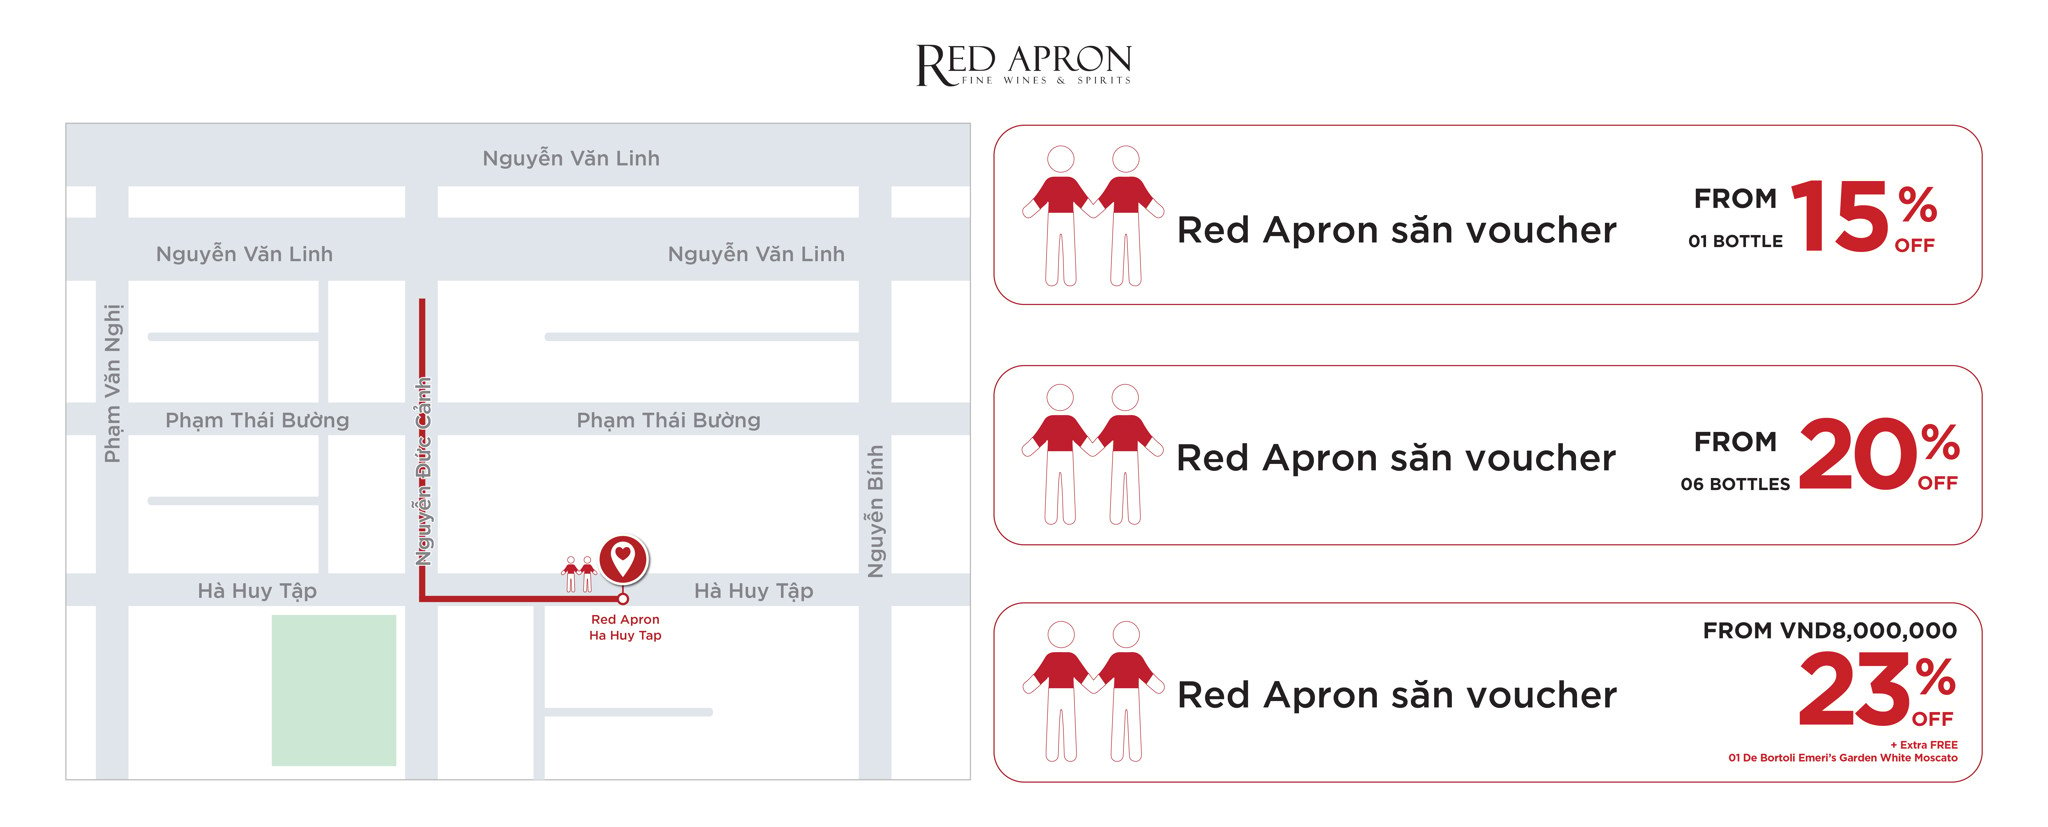 RED APRON HA HUY TAP | HAPPY HUNTING FOR VOUCHER UP TO 30% OFF   - WINE TASTING AT THE SHOP